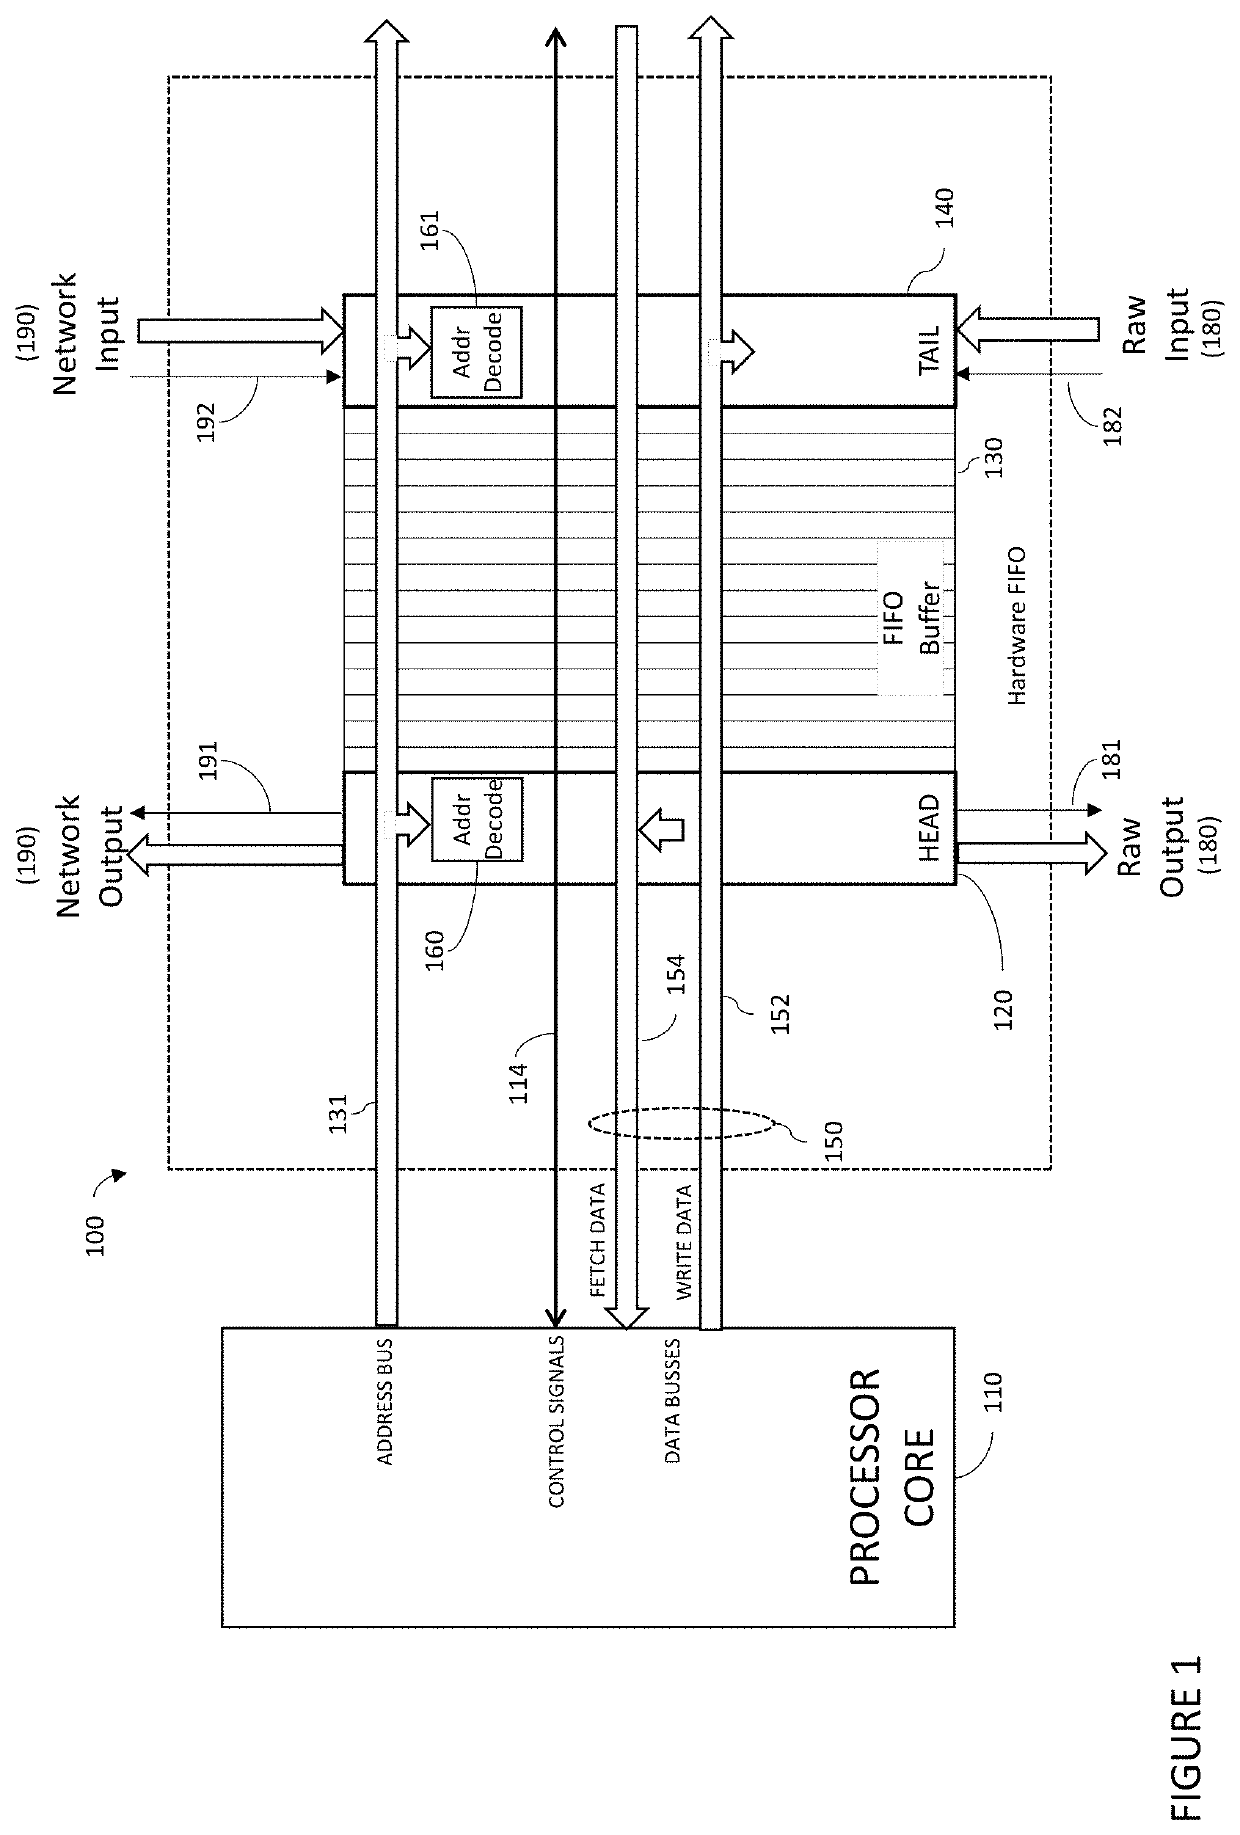 Systems and method for mapping FIFOs to processor address space